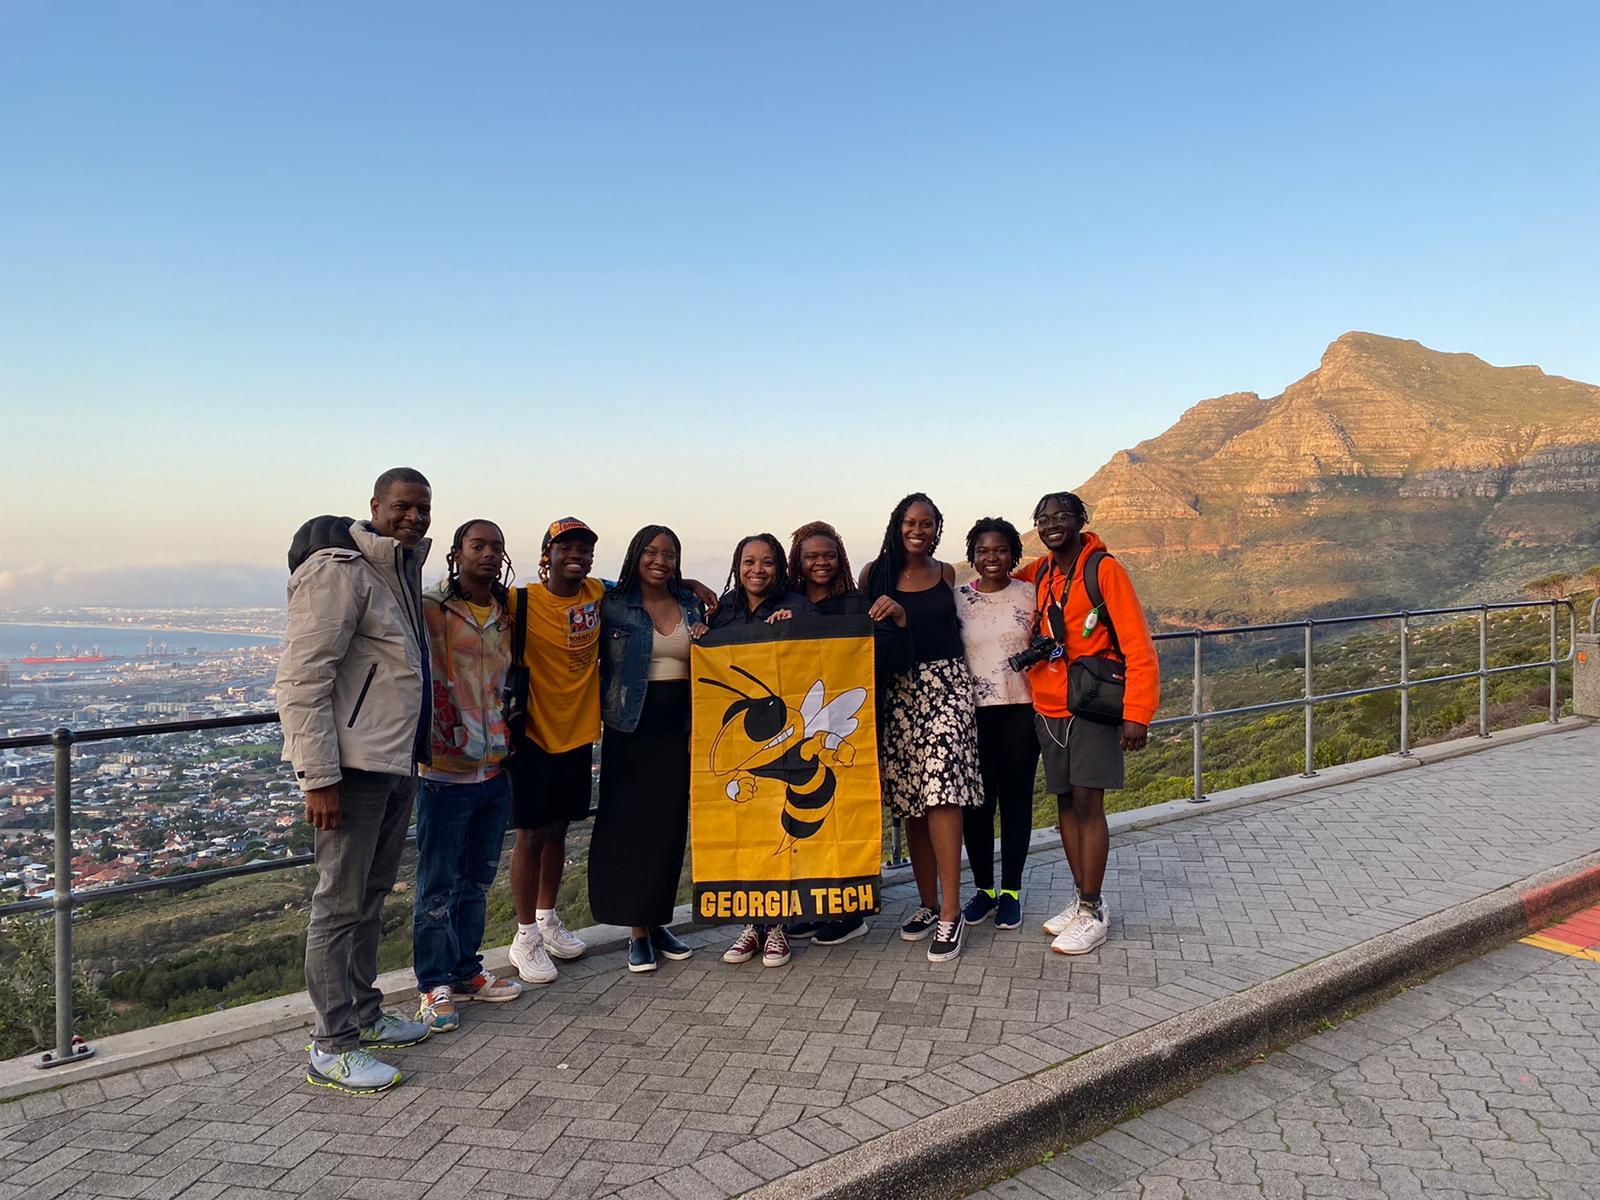 Students and staff with OMED’s Study Abroad and Global Innovation Project after going to the top of Table Mountain, overlooking the city of Cape Town in South Africa.